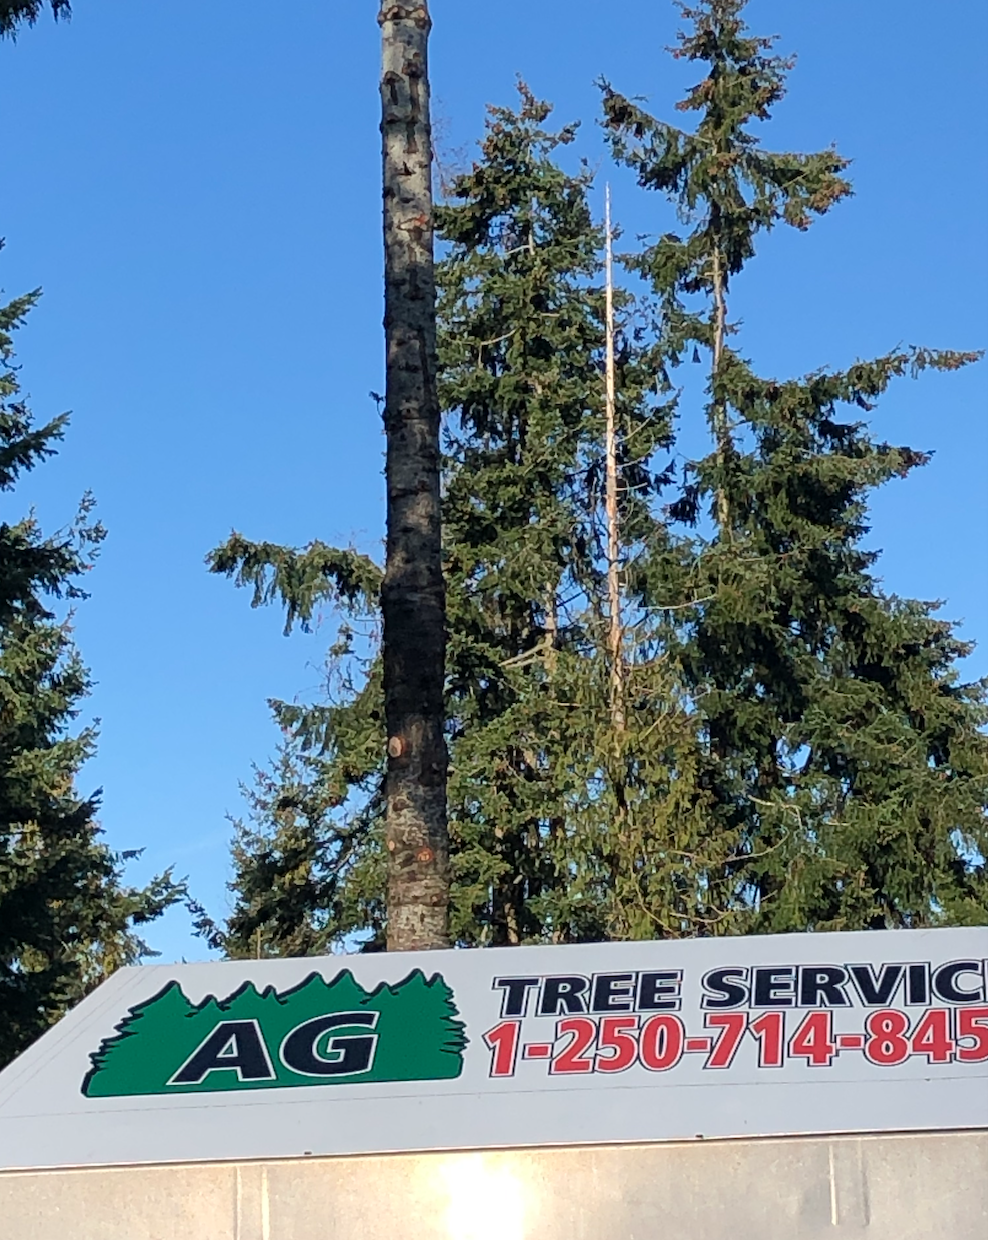 AG Tree Service | 775 Barclay Crescent, Parksville, BC V9P 1Z3, Canada | Phone: (250) 714-8454